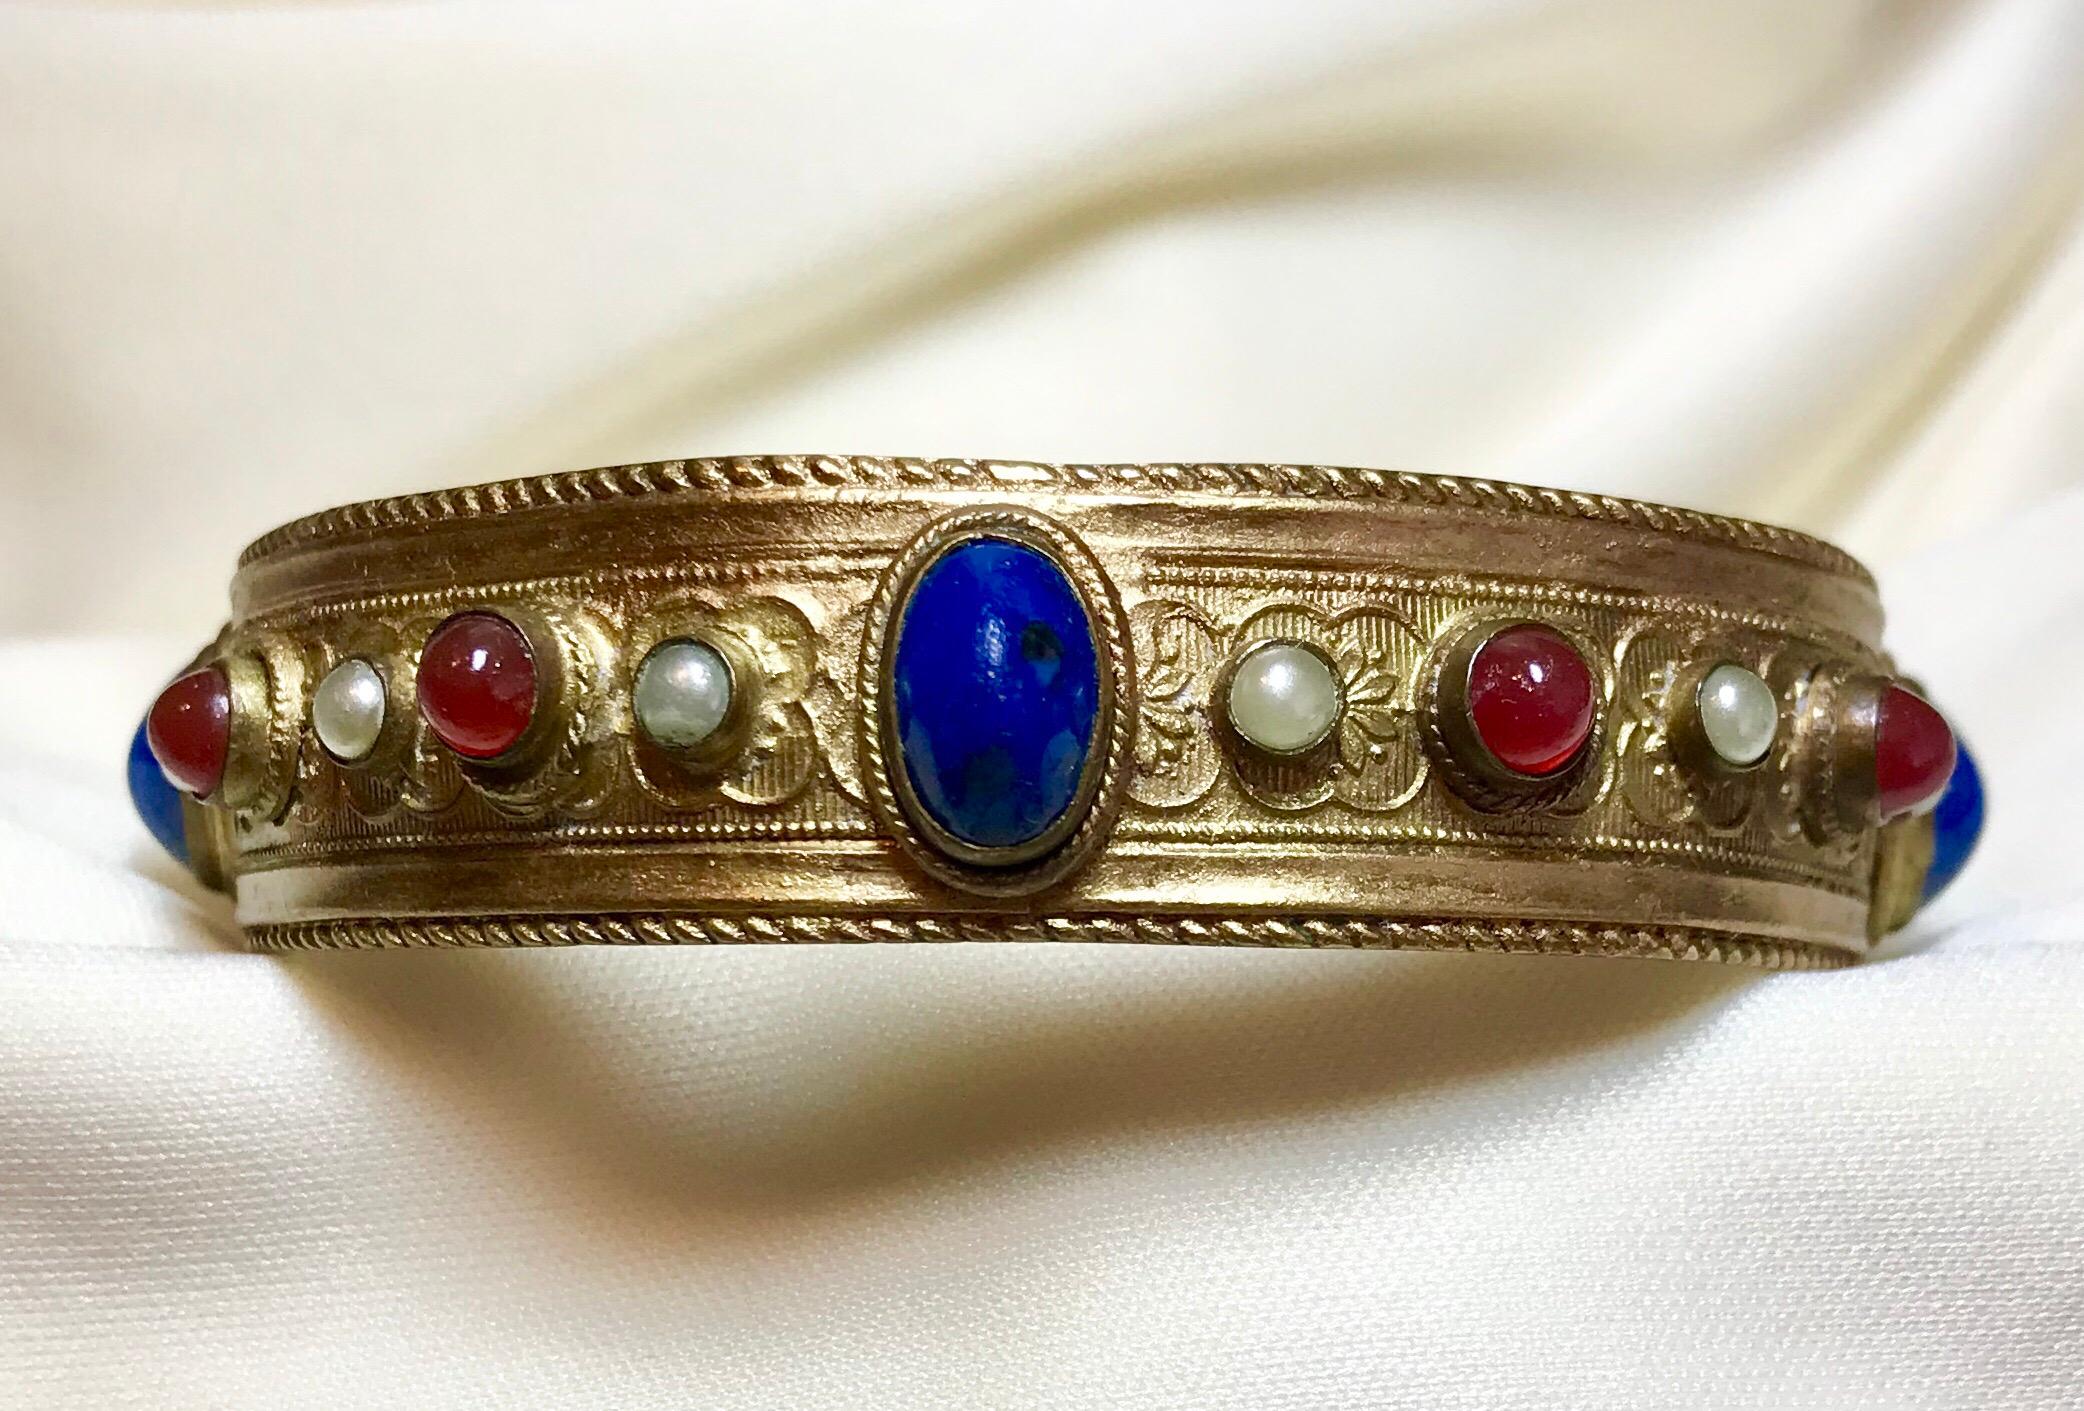 Circa 1920s plated brass bangle with a raised floral design and a rope motif edging.  It is bezel set with glass cabochons in shades of carnelian and lapis-blue and embellished with faux-pearls.  The interior measures 8.4